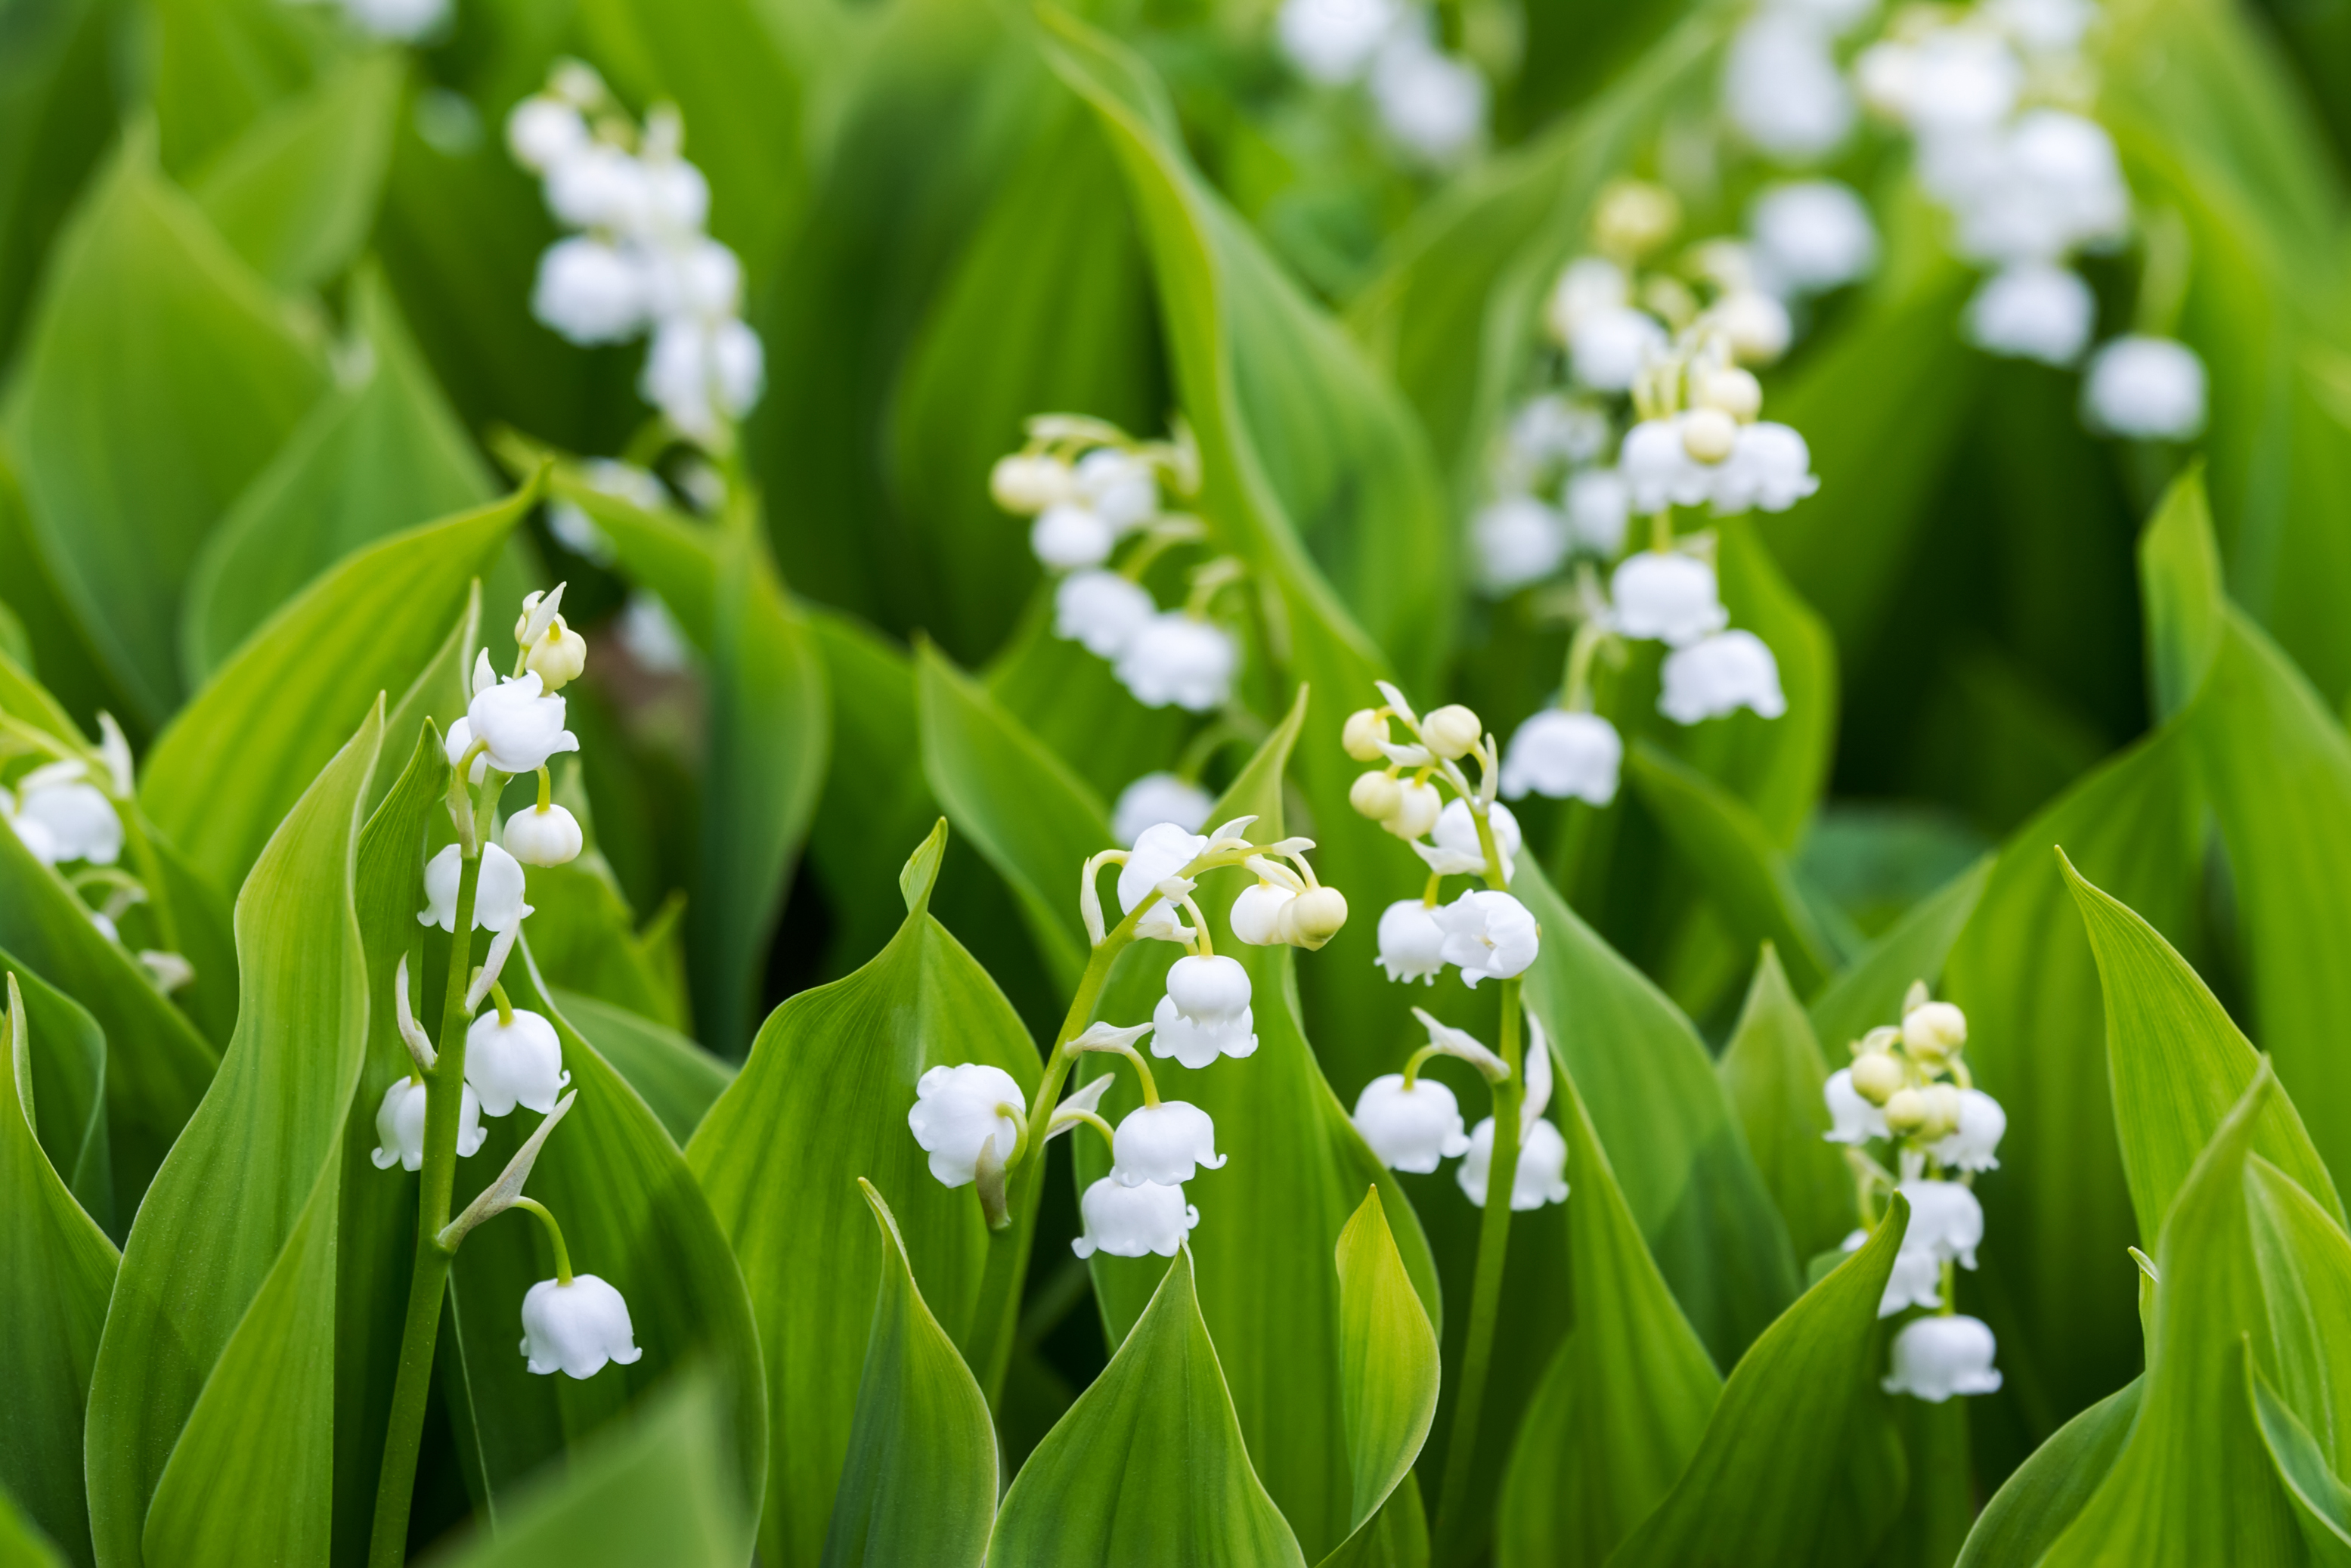 Lily of the valley (Convallaria majalis) (iStock/PA)